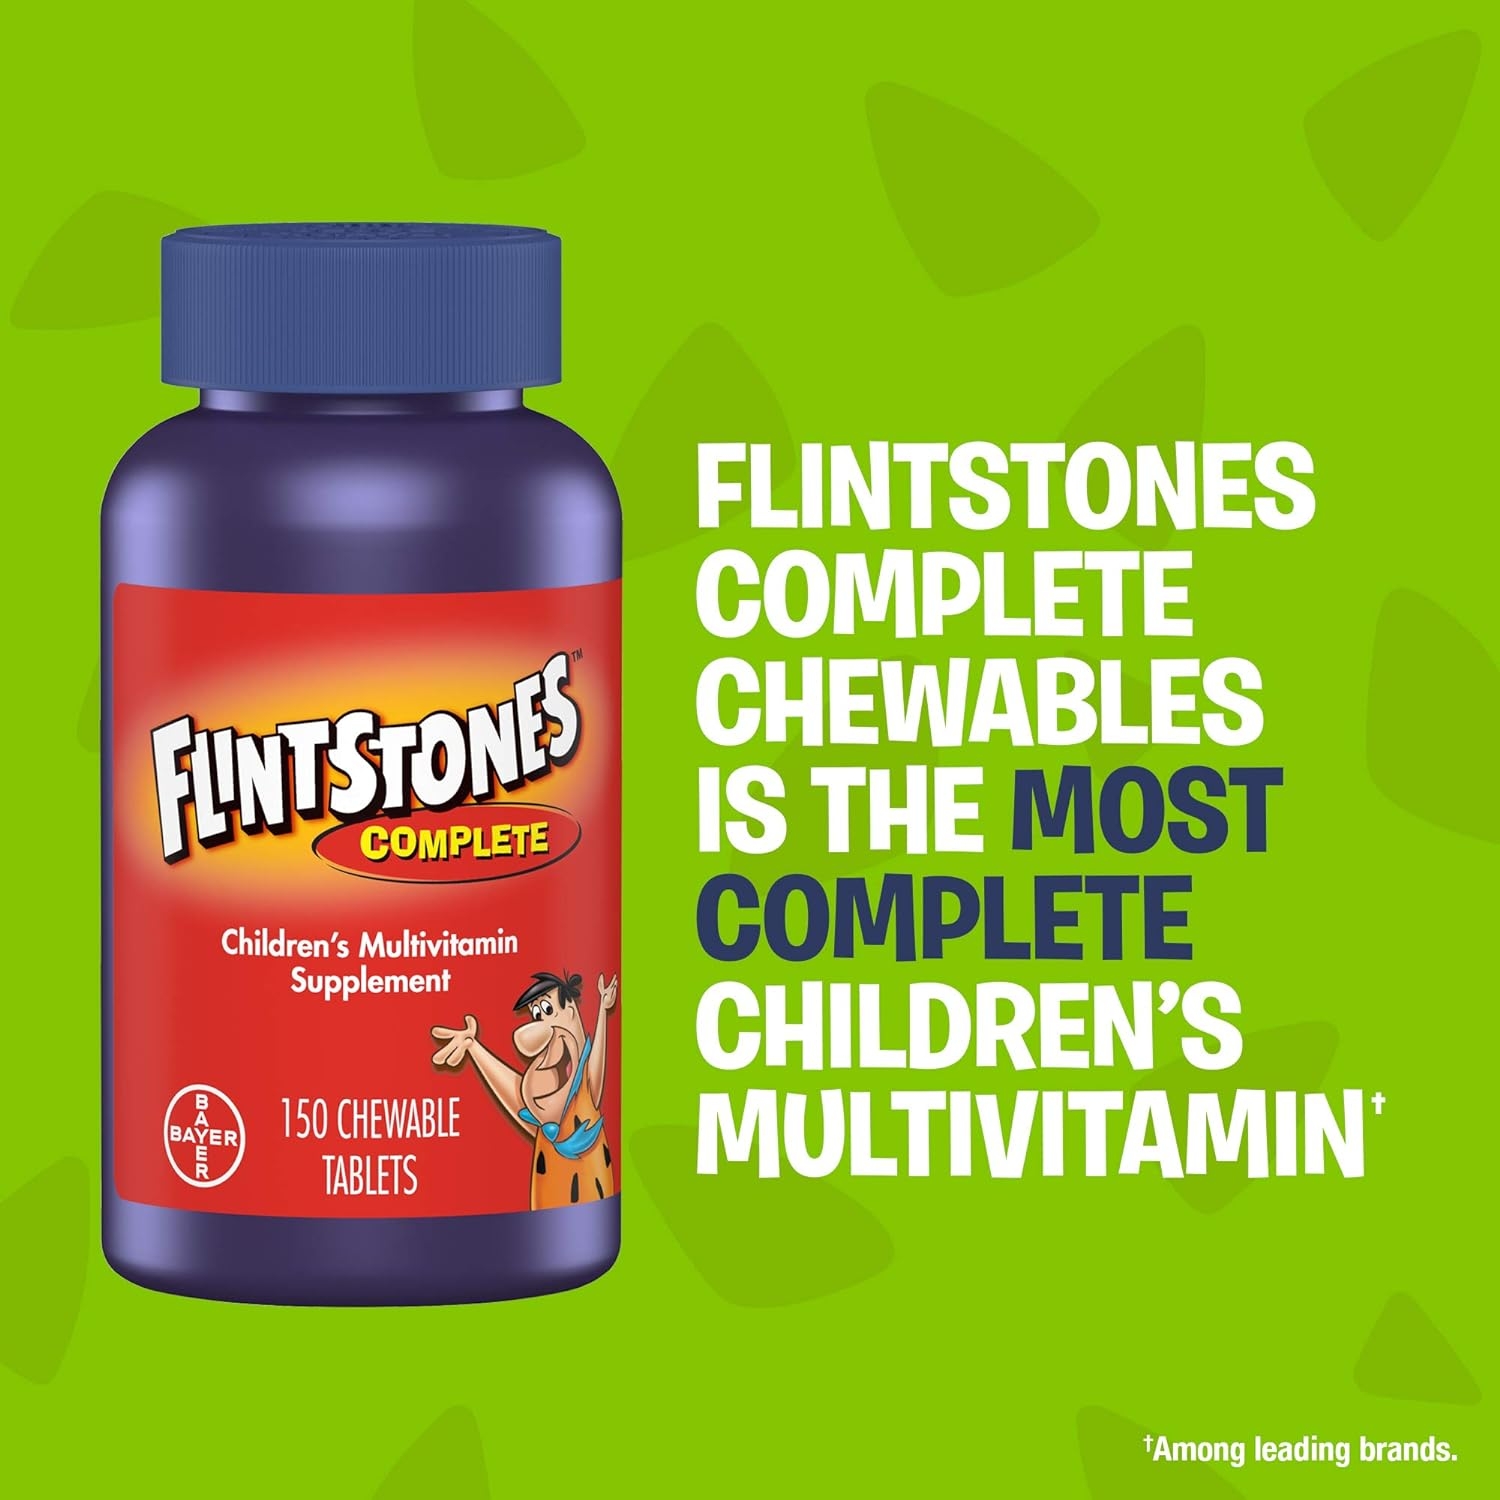 Flintstones Chewable Kids Vitamins, Complete Multivitamin for Kids and Toddlers with Iron, Calcium, Vitamin C, Vitamin D & more, 180ct